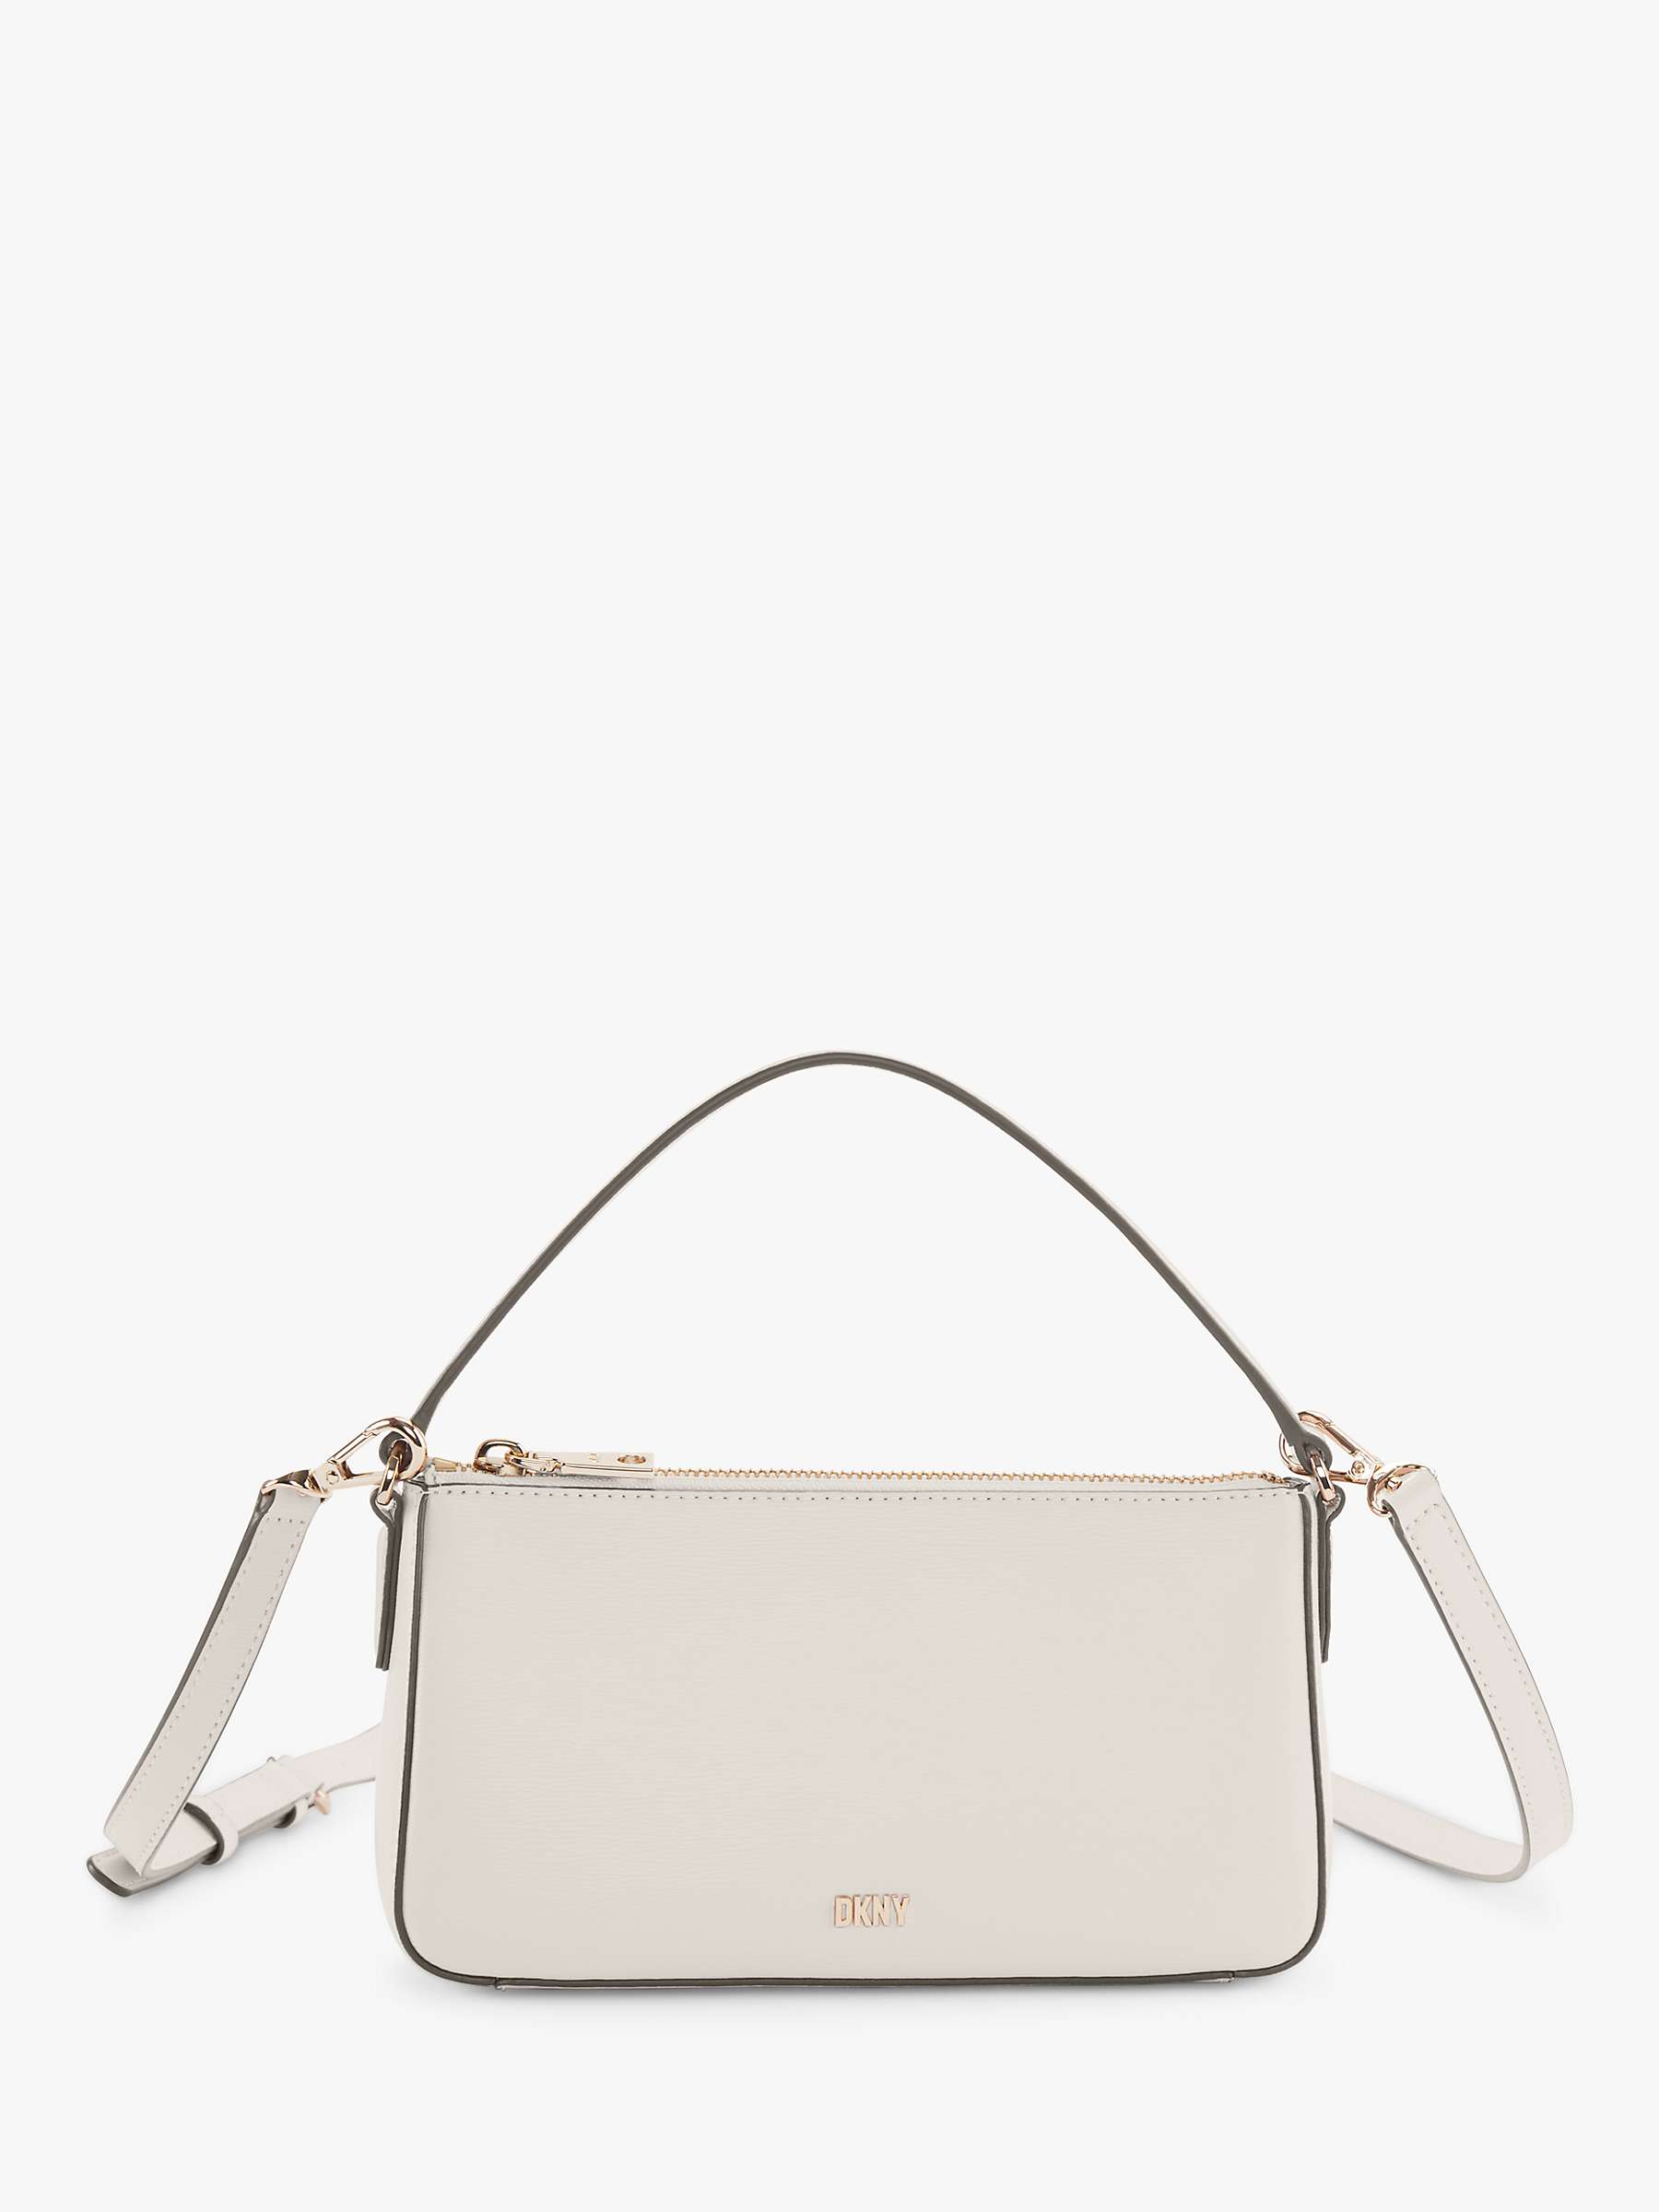 Buy DKNY Bryant Leather Cross Body Bag Online at johnlewis.com